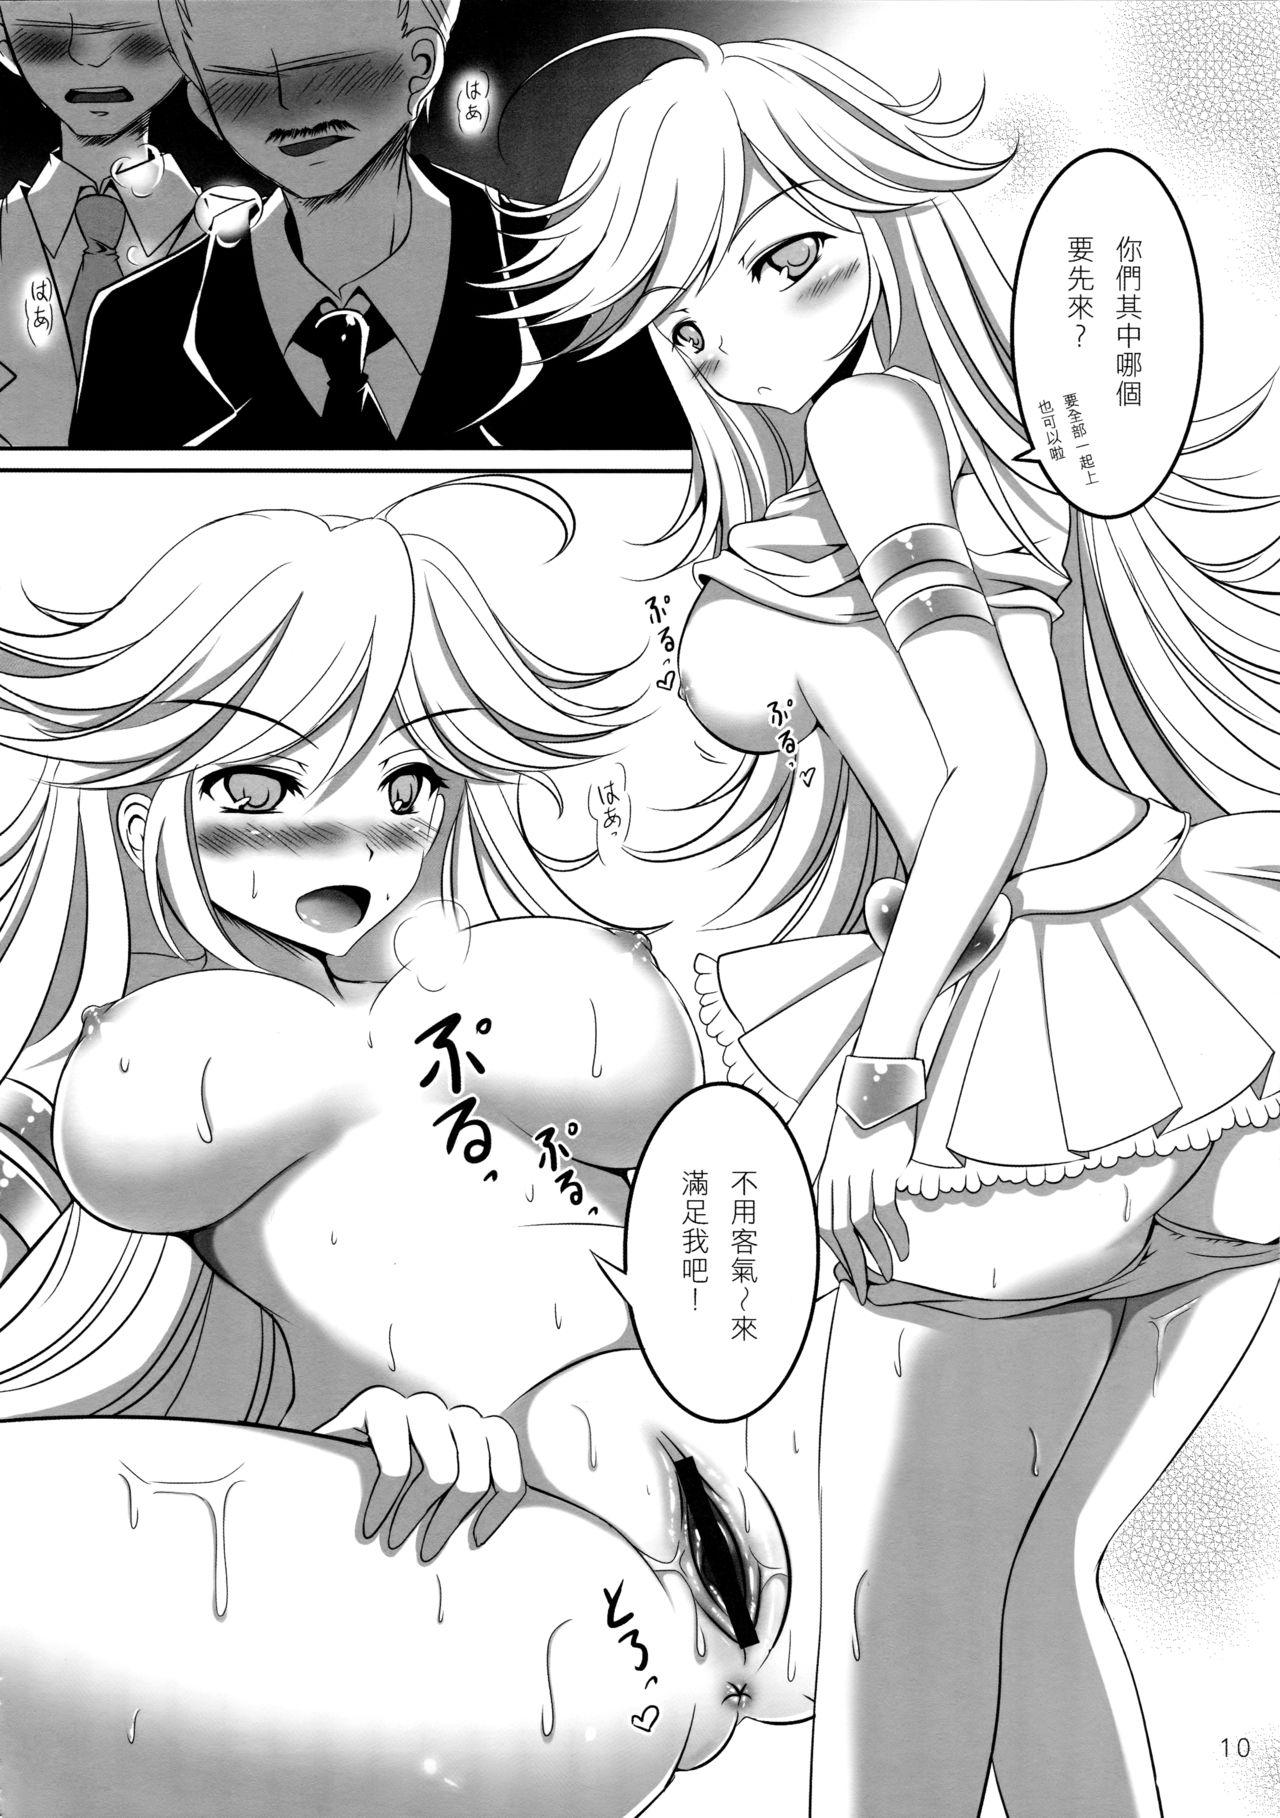 Russia Angel Bitches! - Panty and stocking with garterbelt Kitchen - Page 10